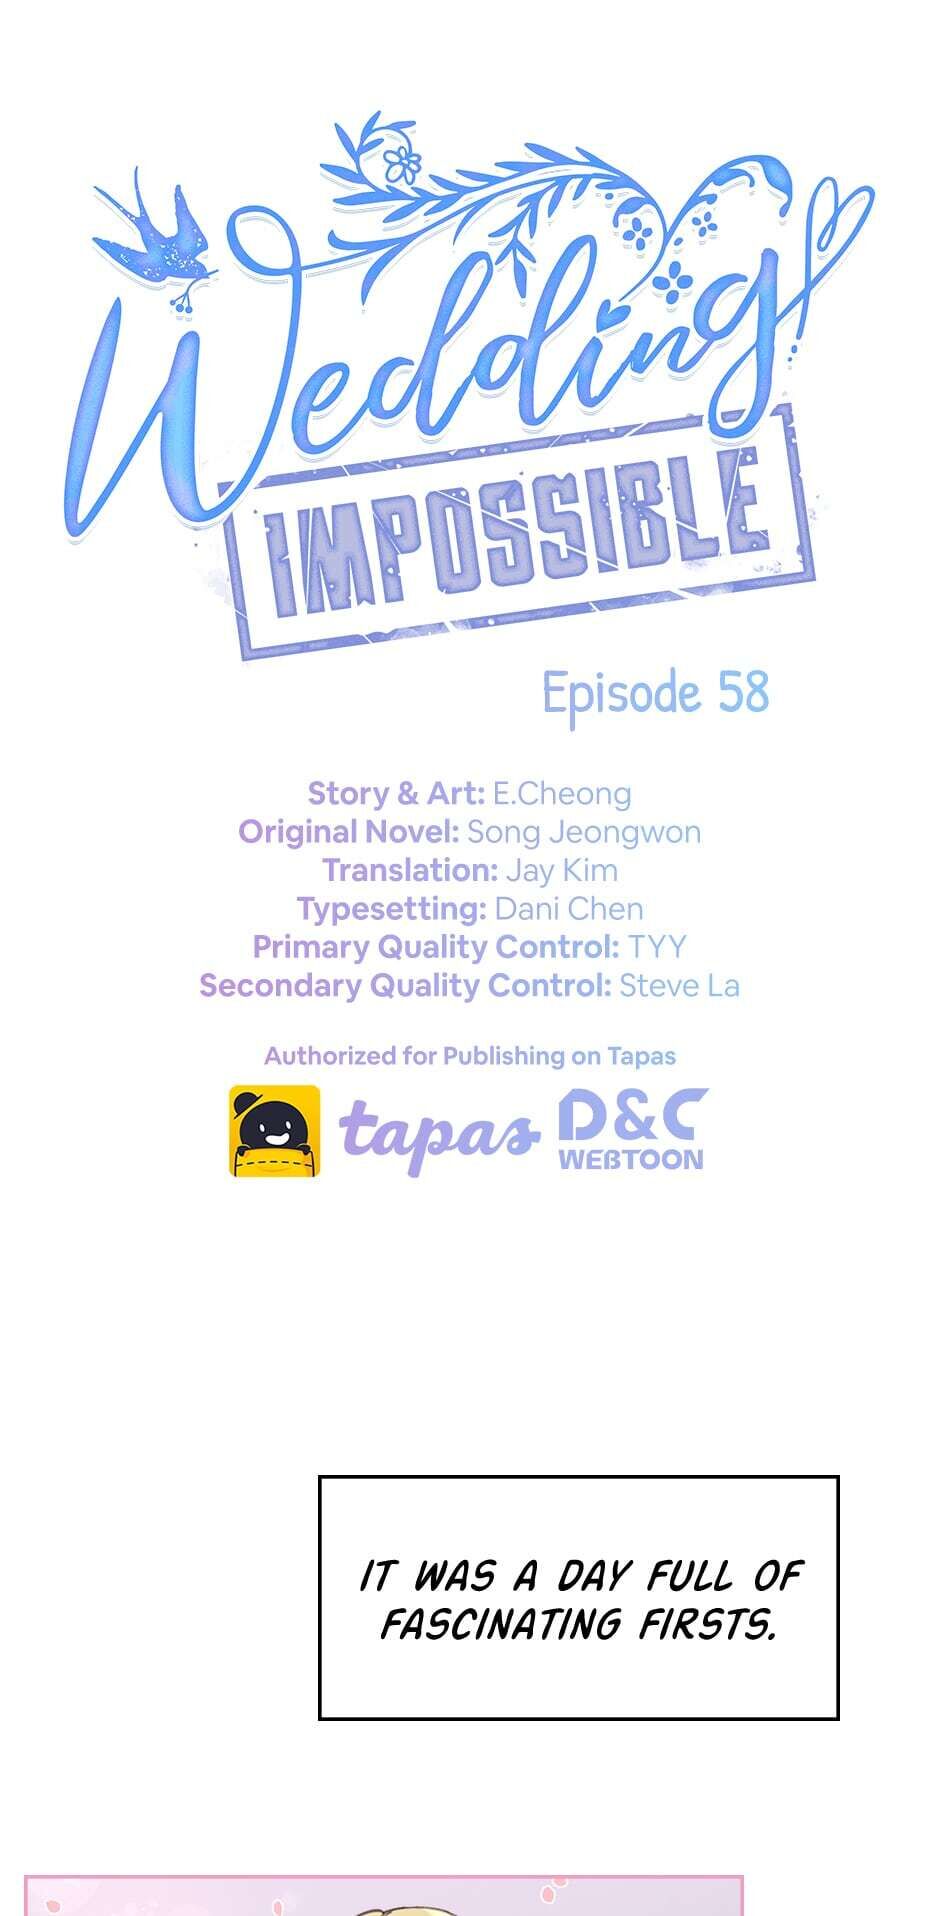 Wedding Impossible Chapter 58